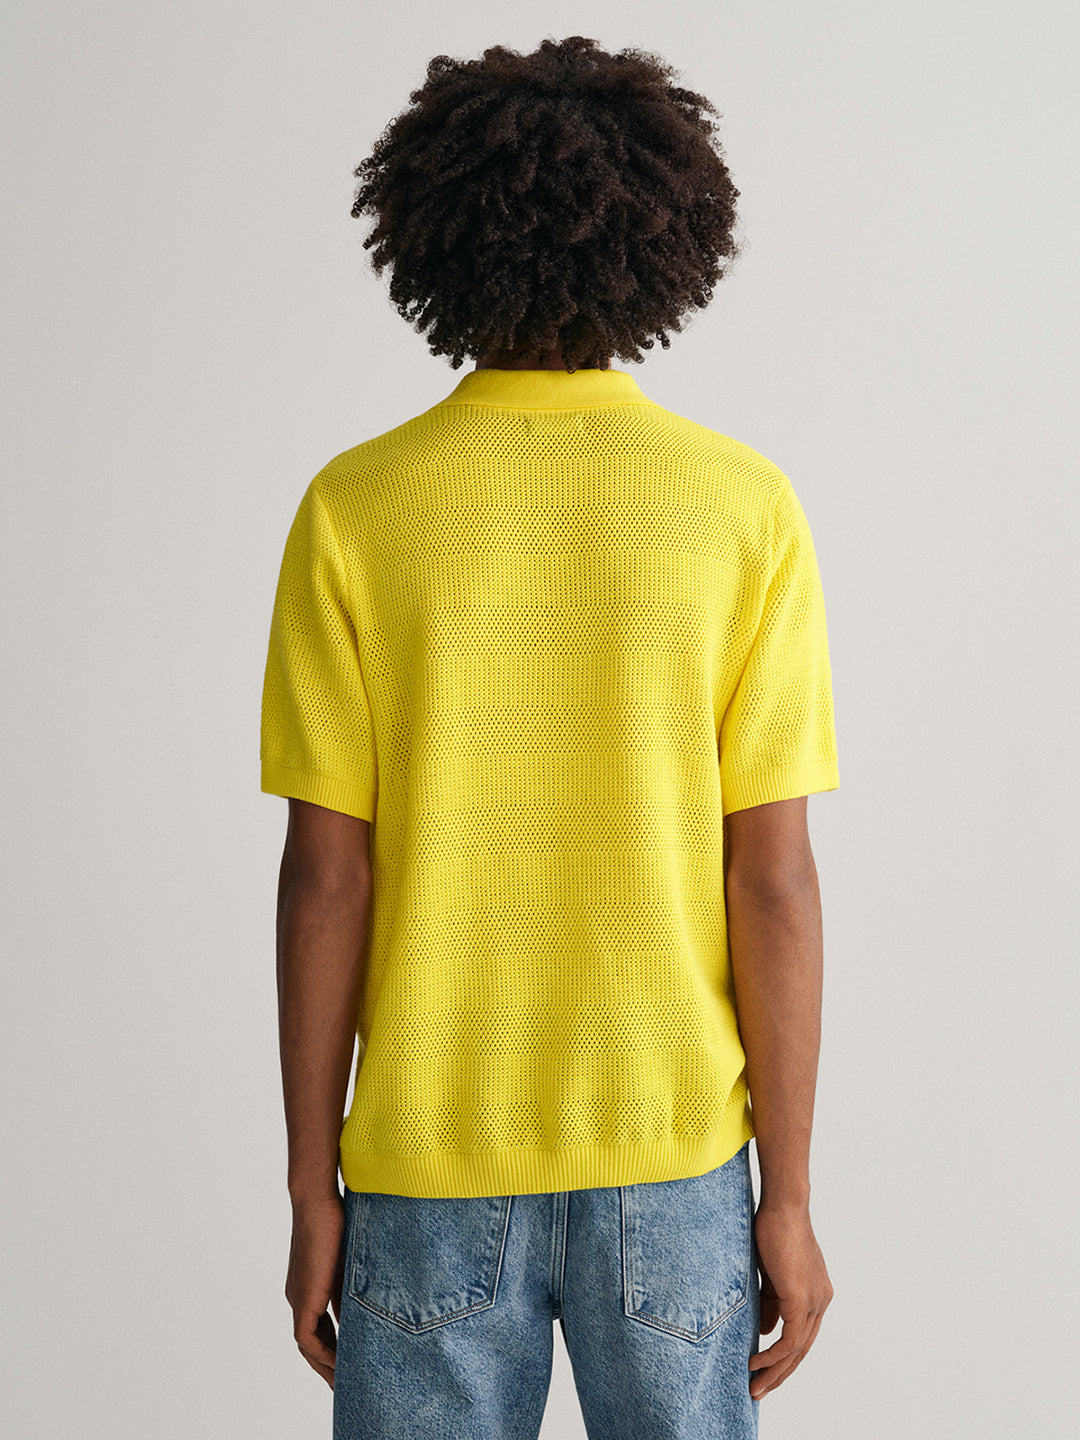 Gant Yellow Relaxed Fit Polo T-Shirt